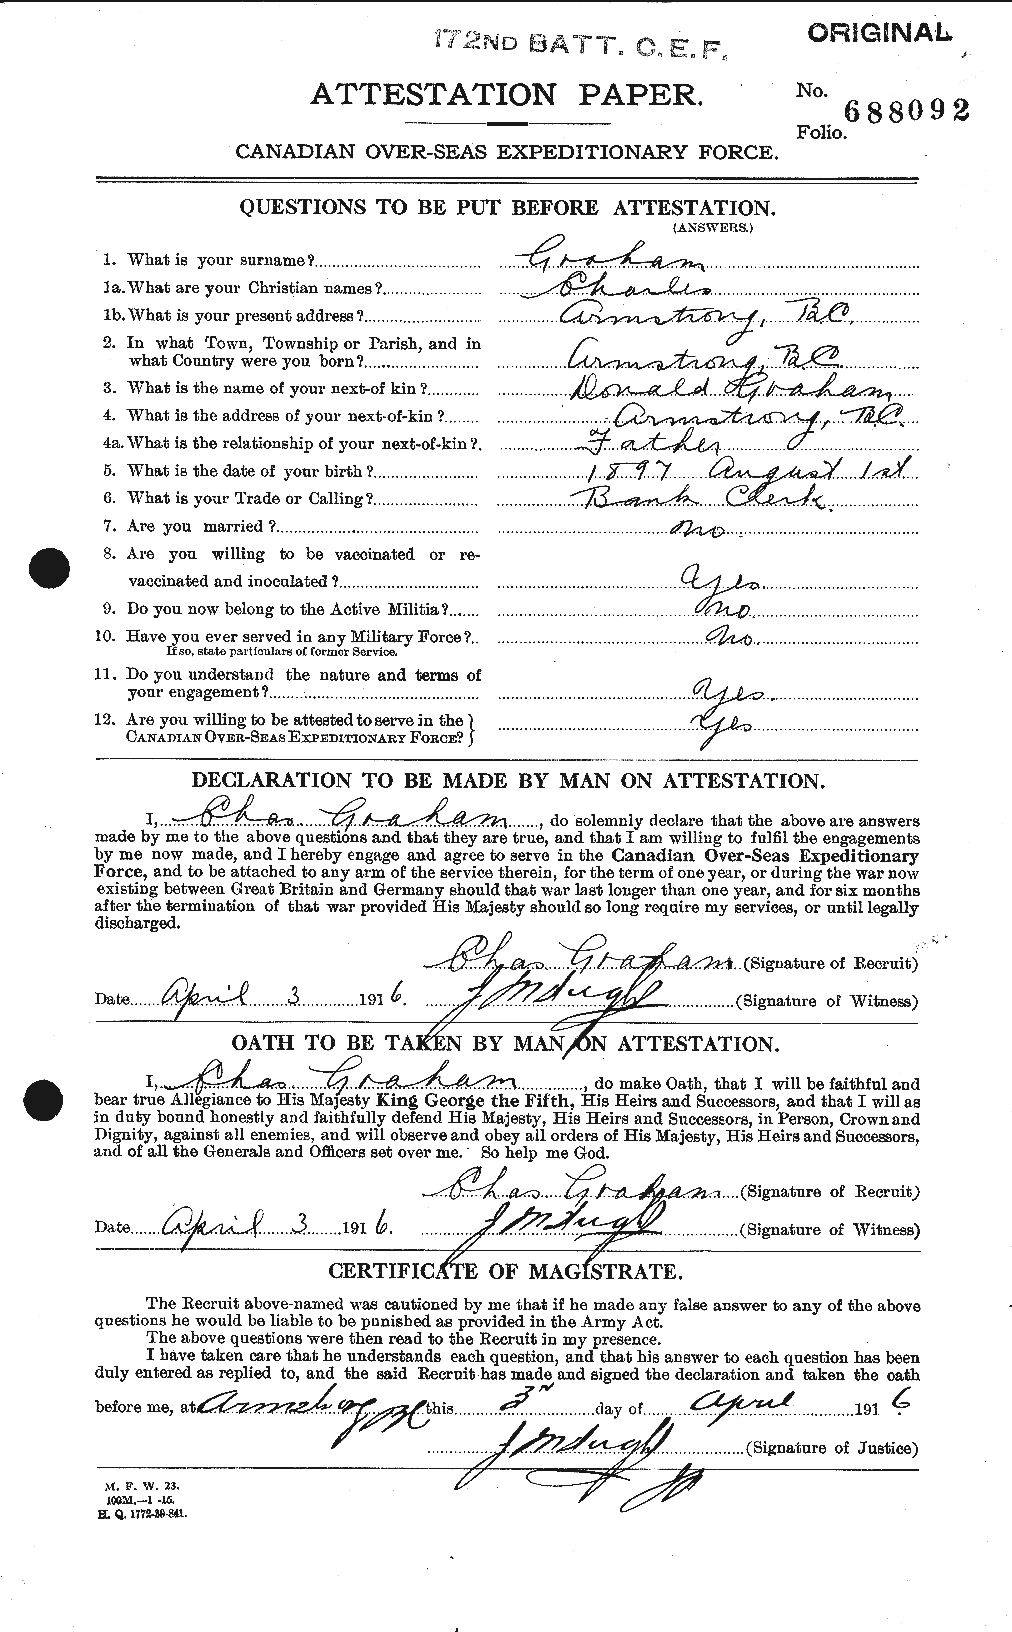 Personnel Records of the First World War - CEF 359687a